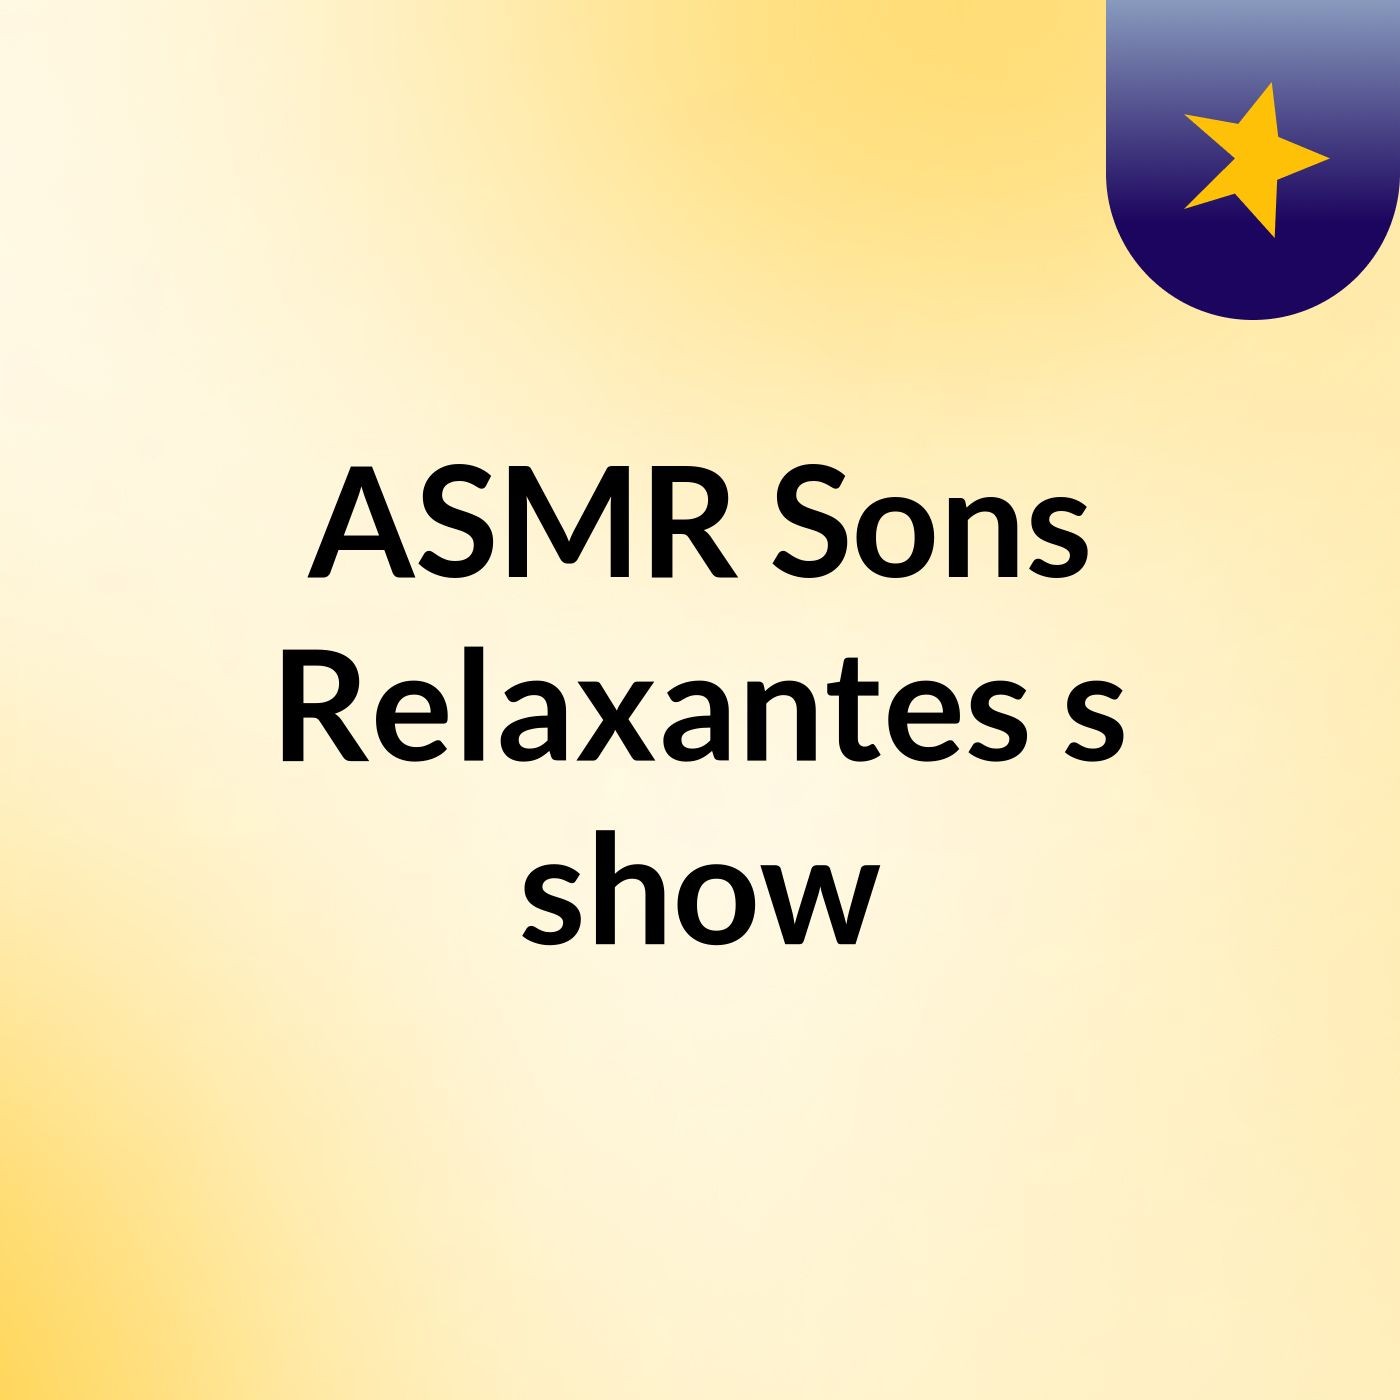 ASMR Sons Relaxantes's show